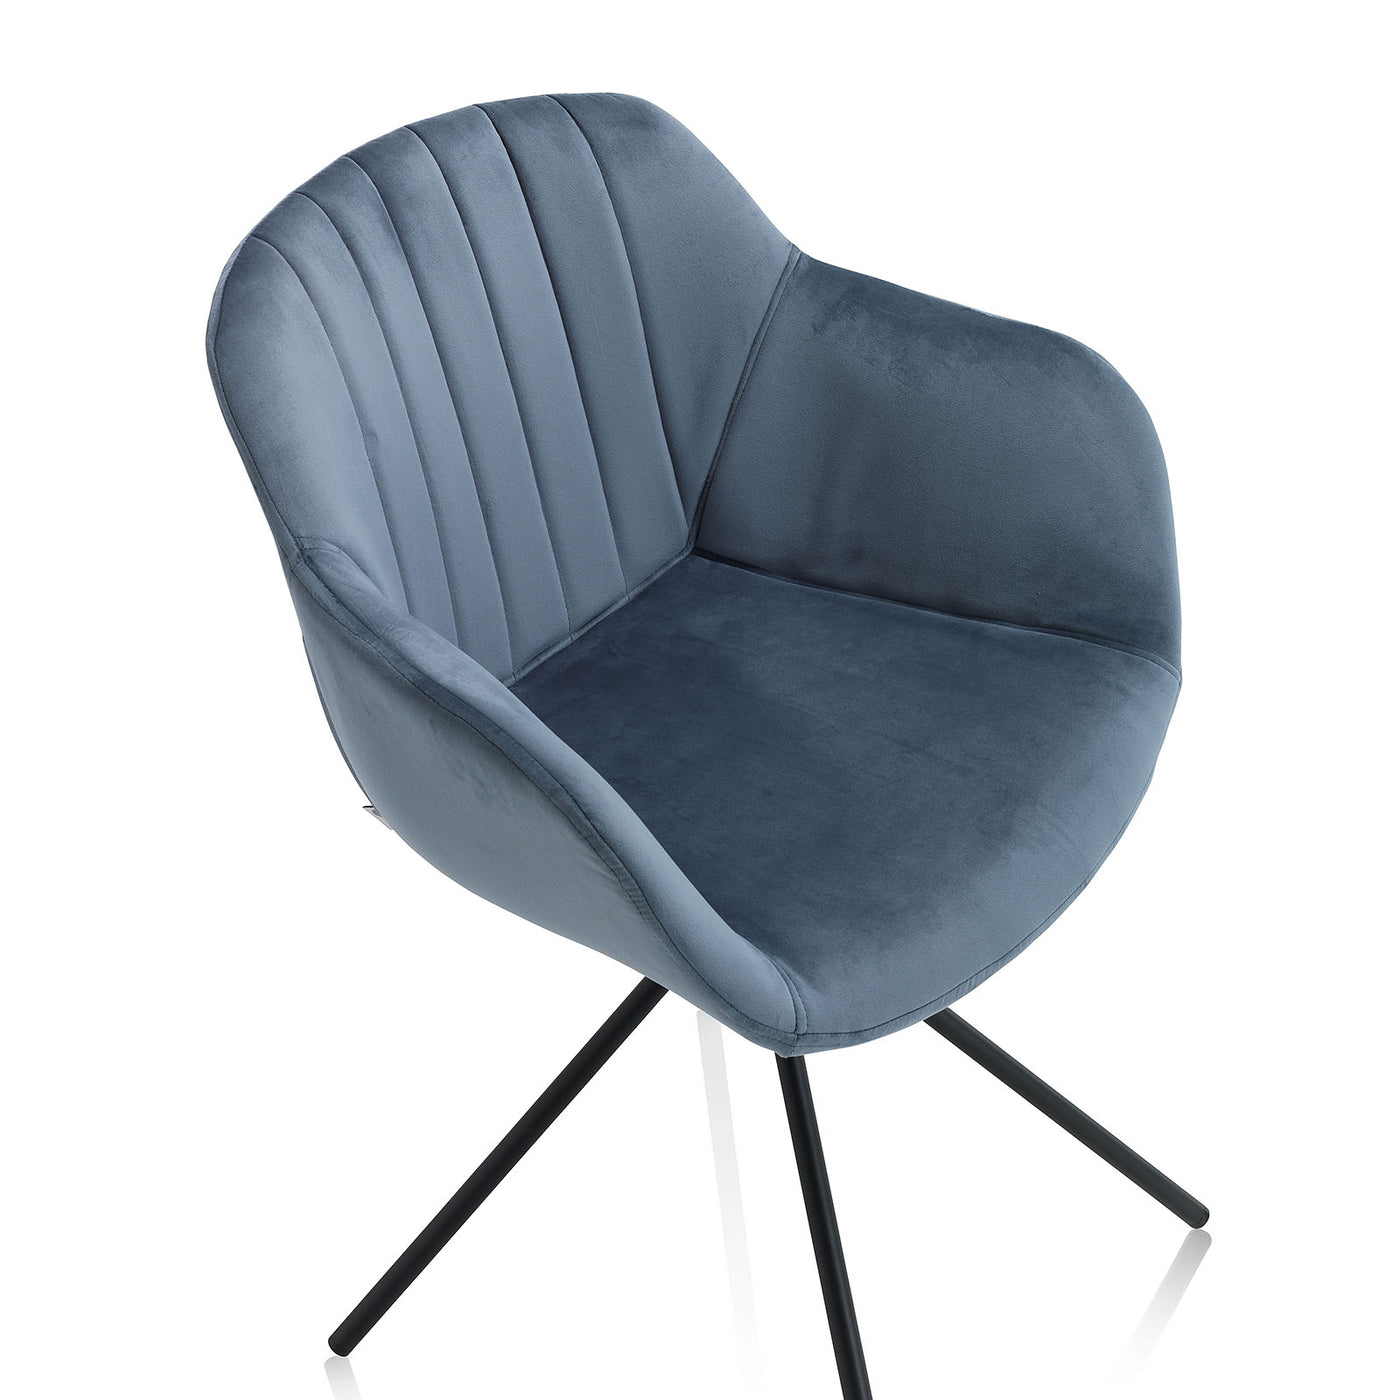 Set of 2 steel blue ODETTE chairs